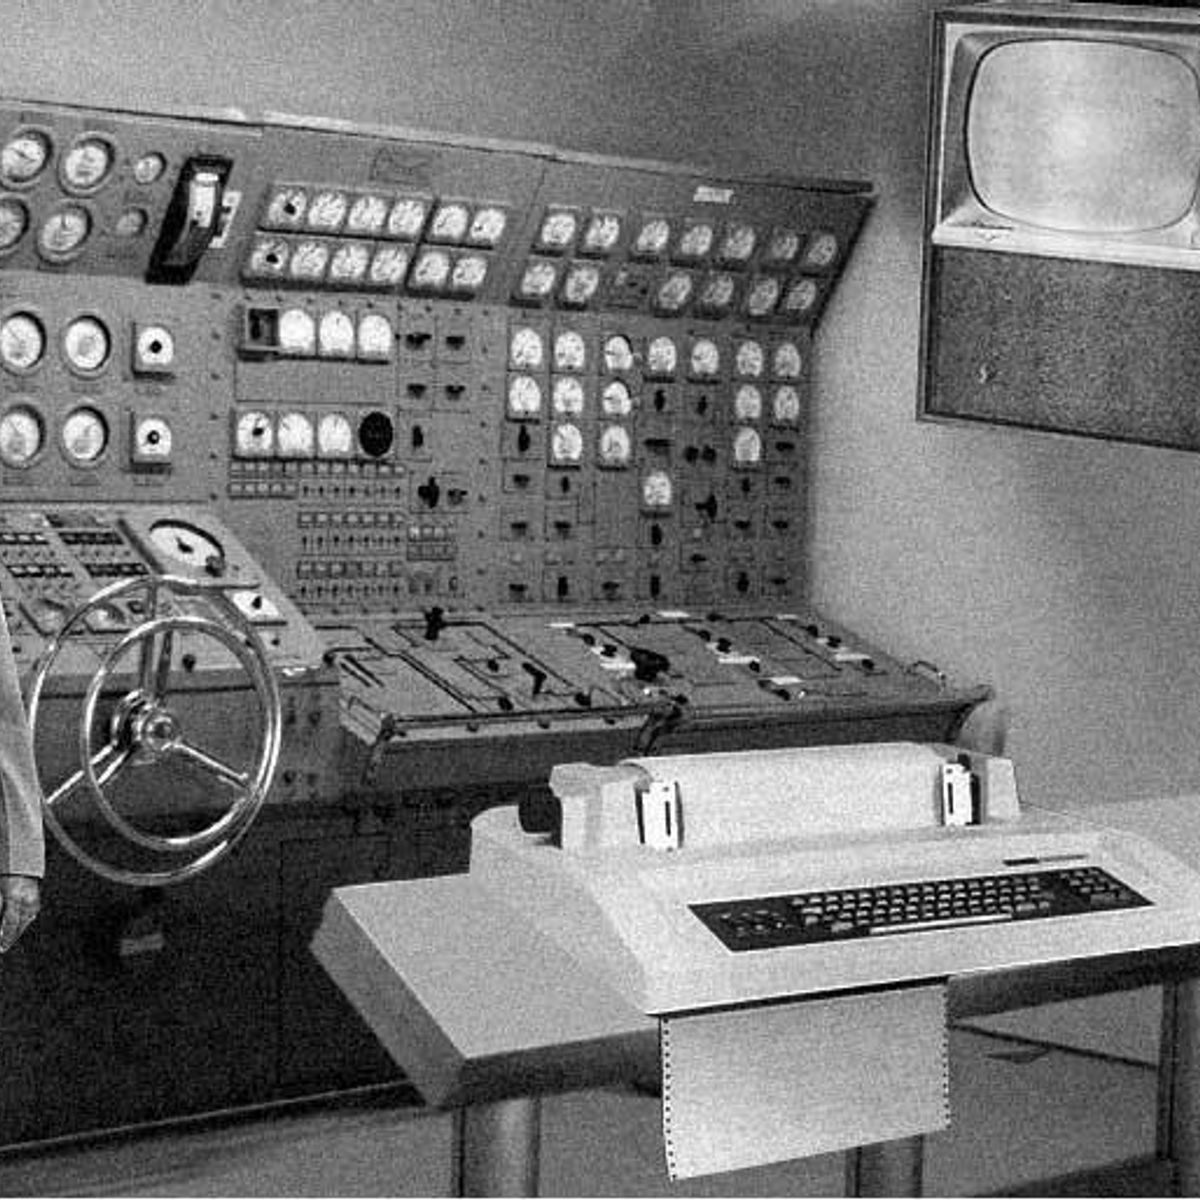 Is This How a Home Computer Was Imagined in 1954? | Snopes.com